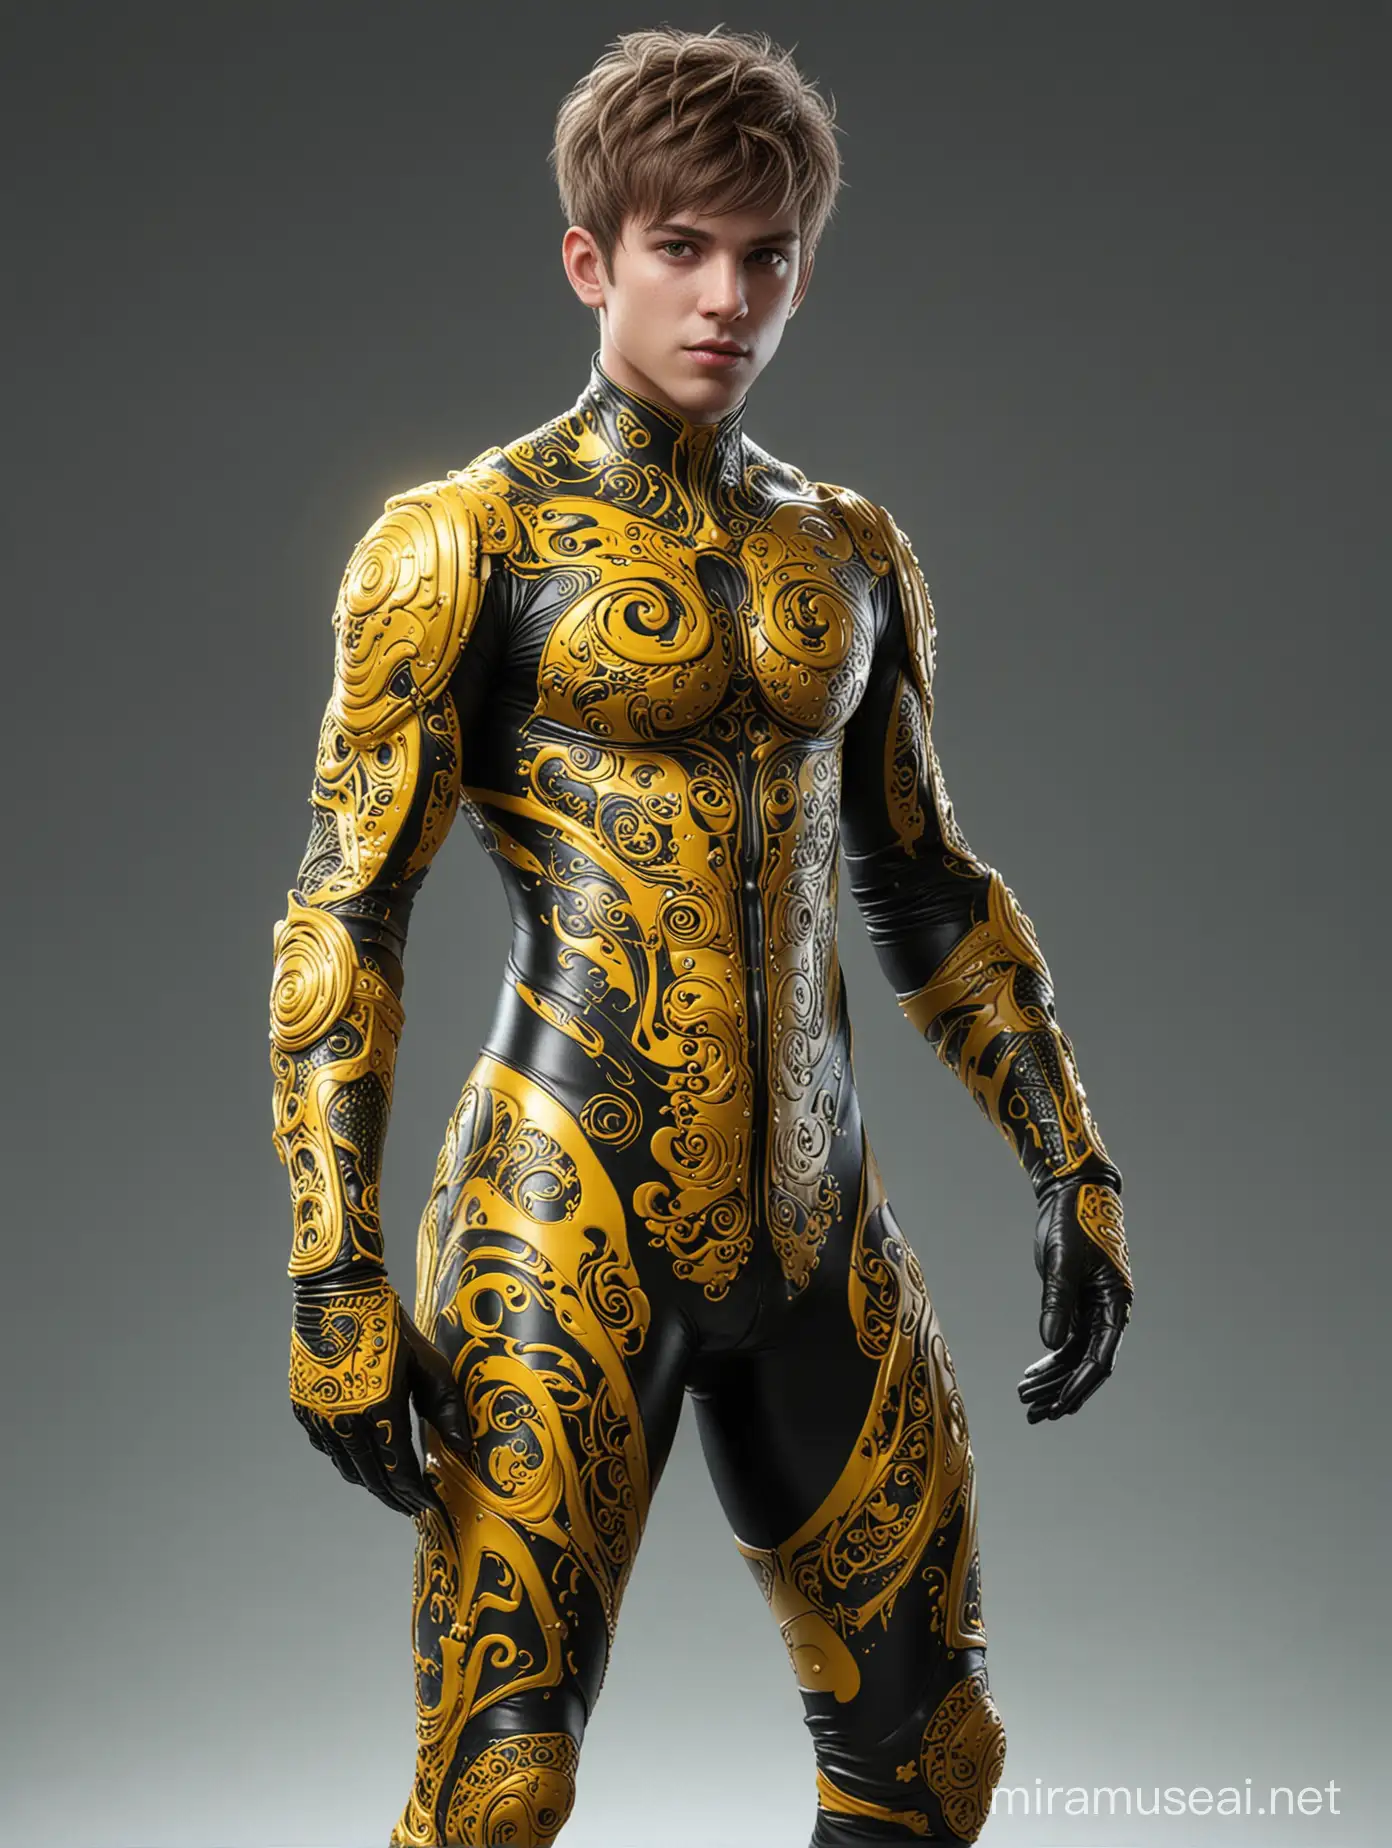 Celestial Stinger Boy in Yellow Swirls Latex Spandex and Gloves